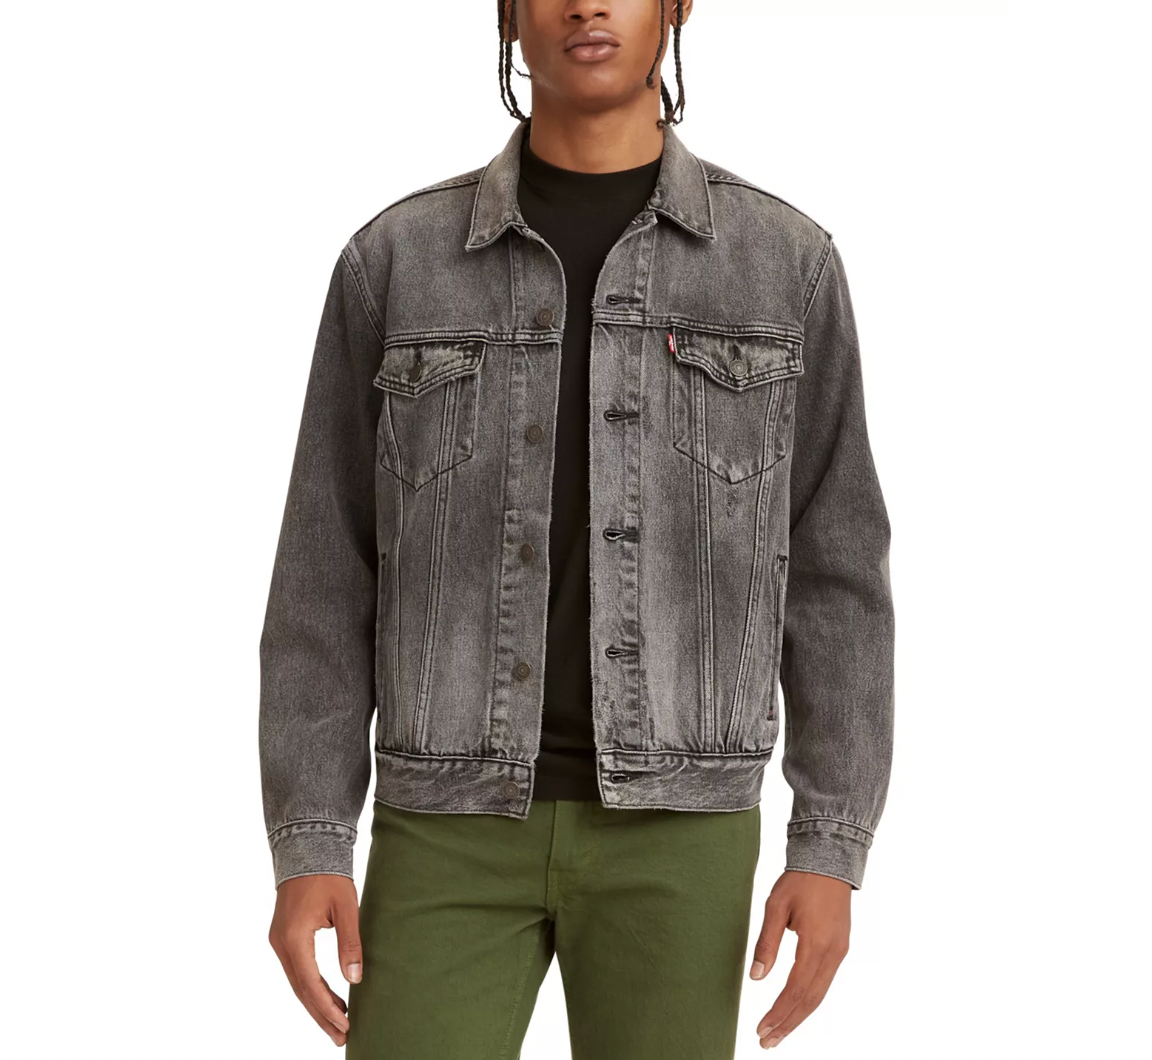 Levi's Sale at Macy's: Take 30% Off Essential Denim Jackets and Jeans for  Spring | Entertainment Tonight